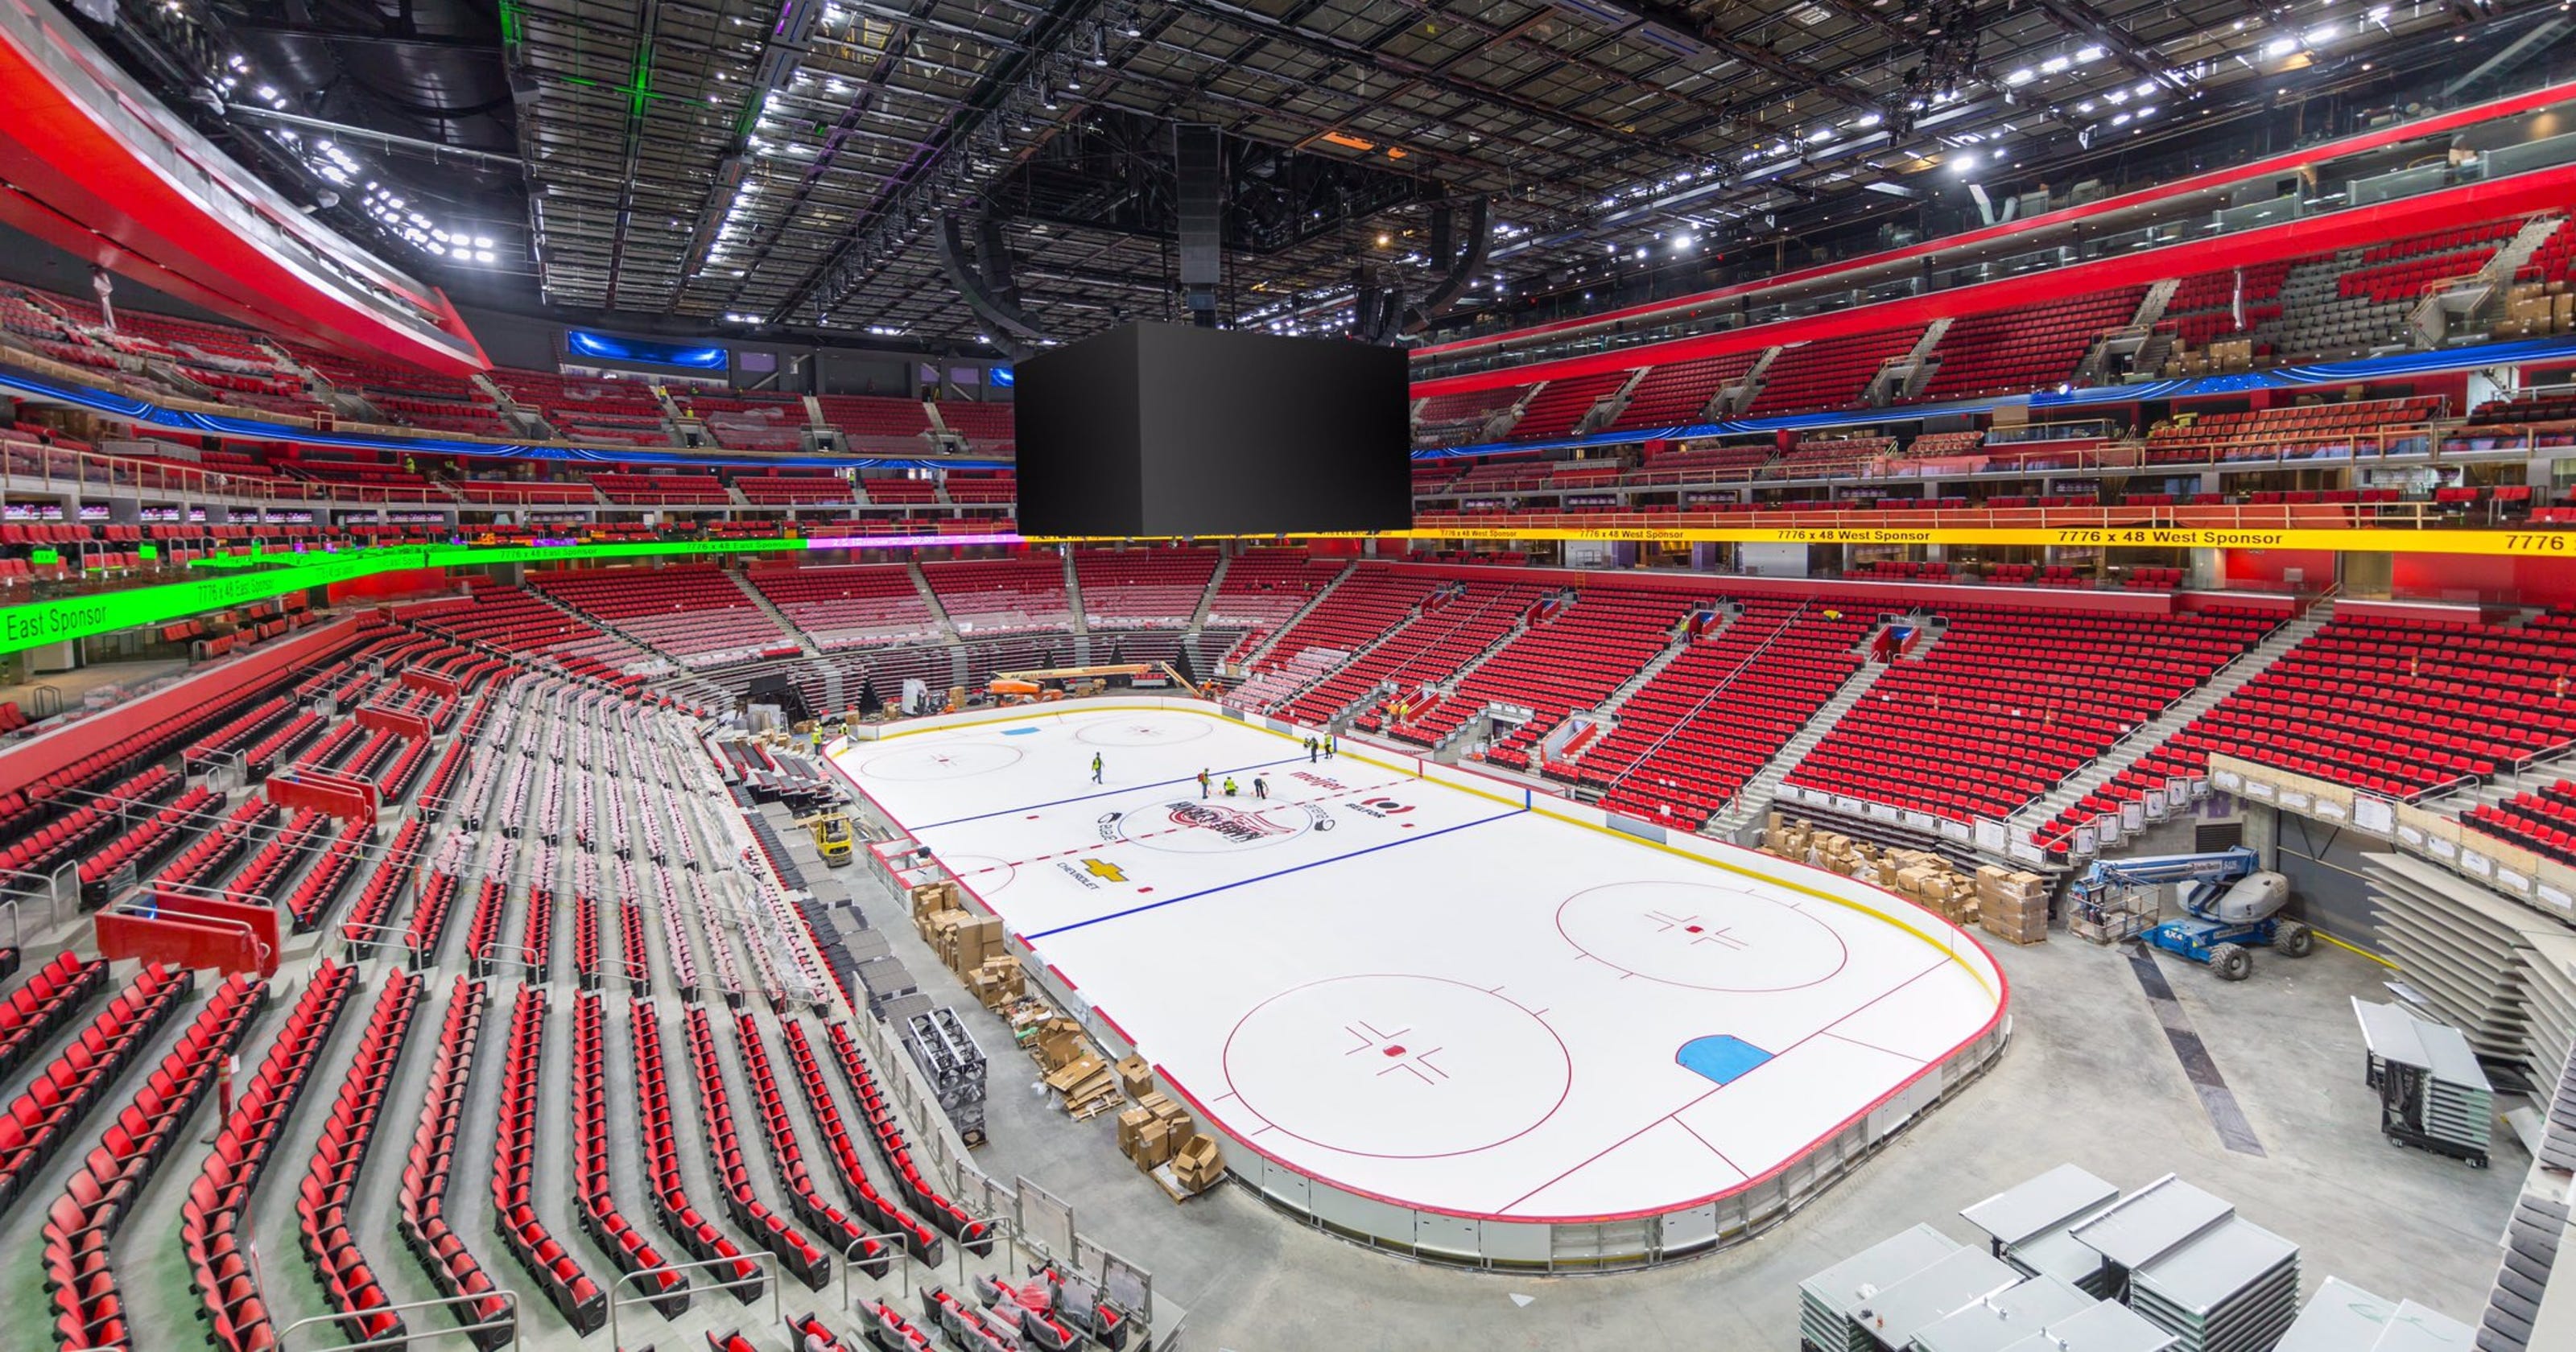 We have ice at Little Caesars Arena!